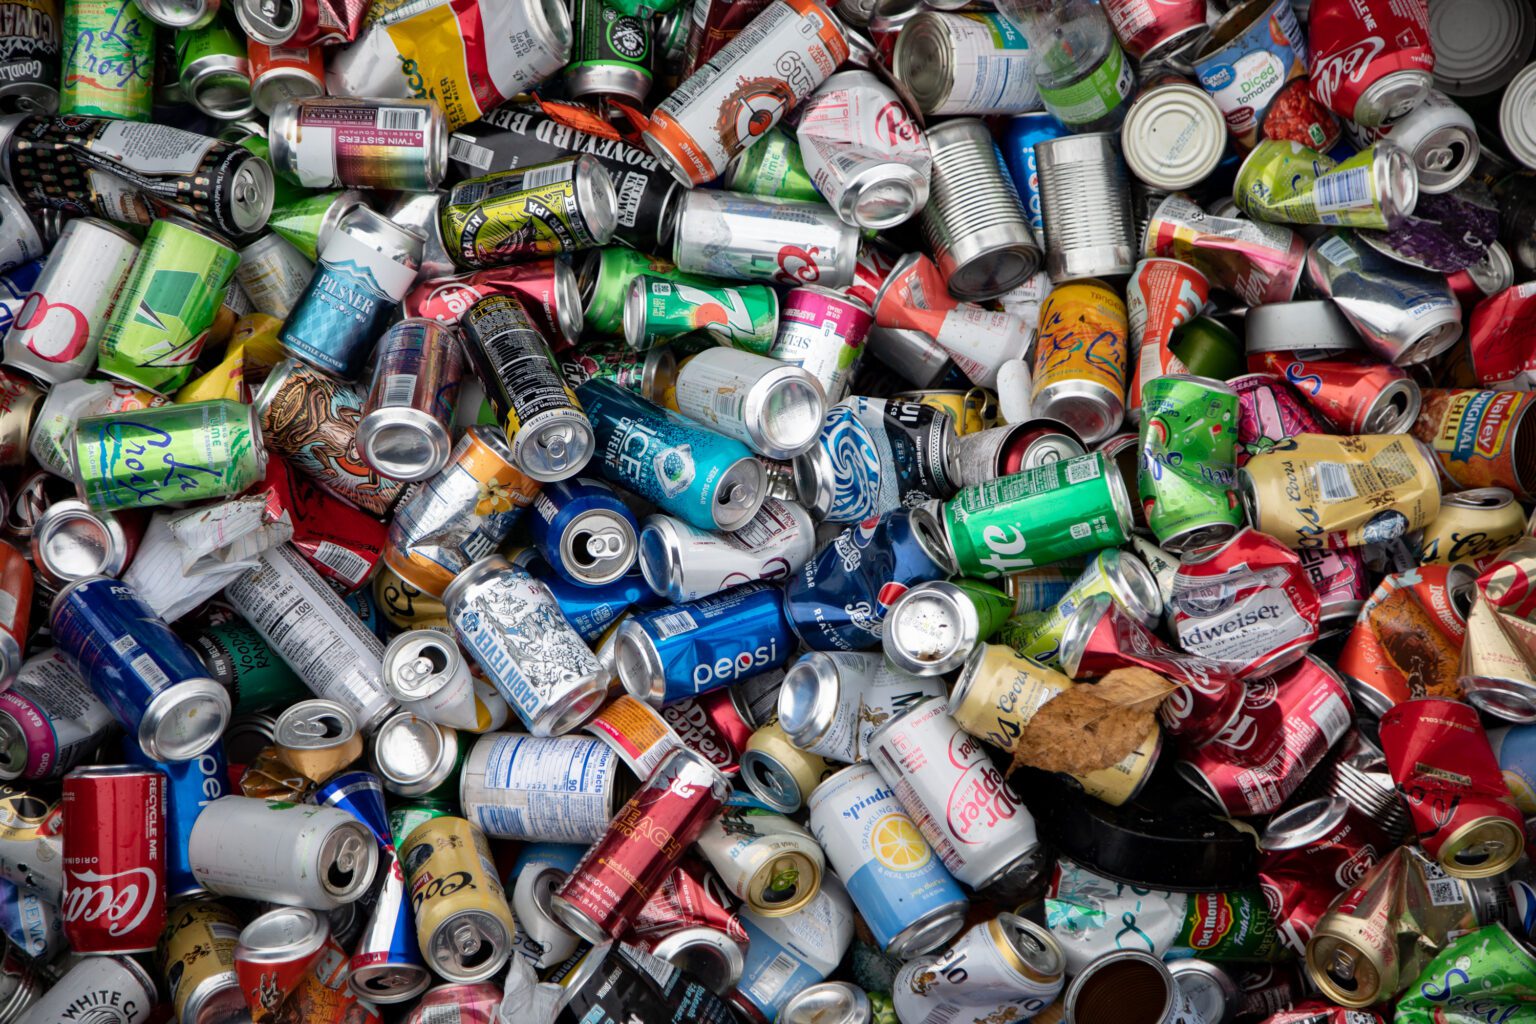 Nooksack Valley Disposal and Recycling center in Lynden collects thousands of cans. Aluminum recycling has increased in northeast Whatcom County